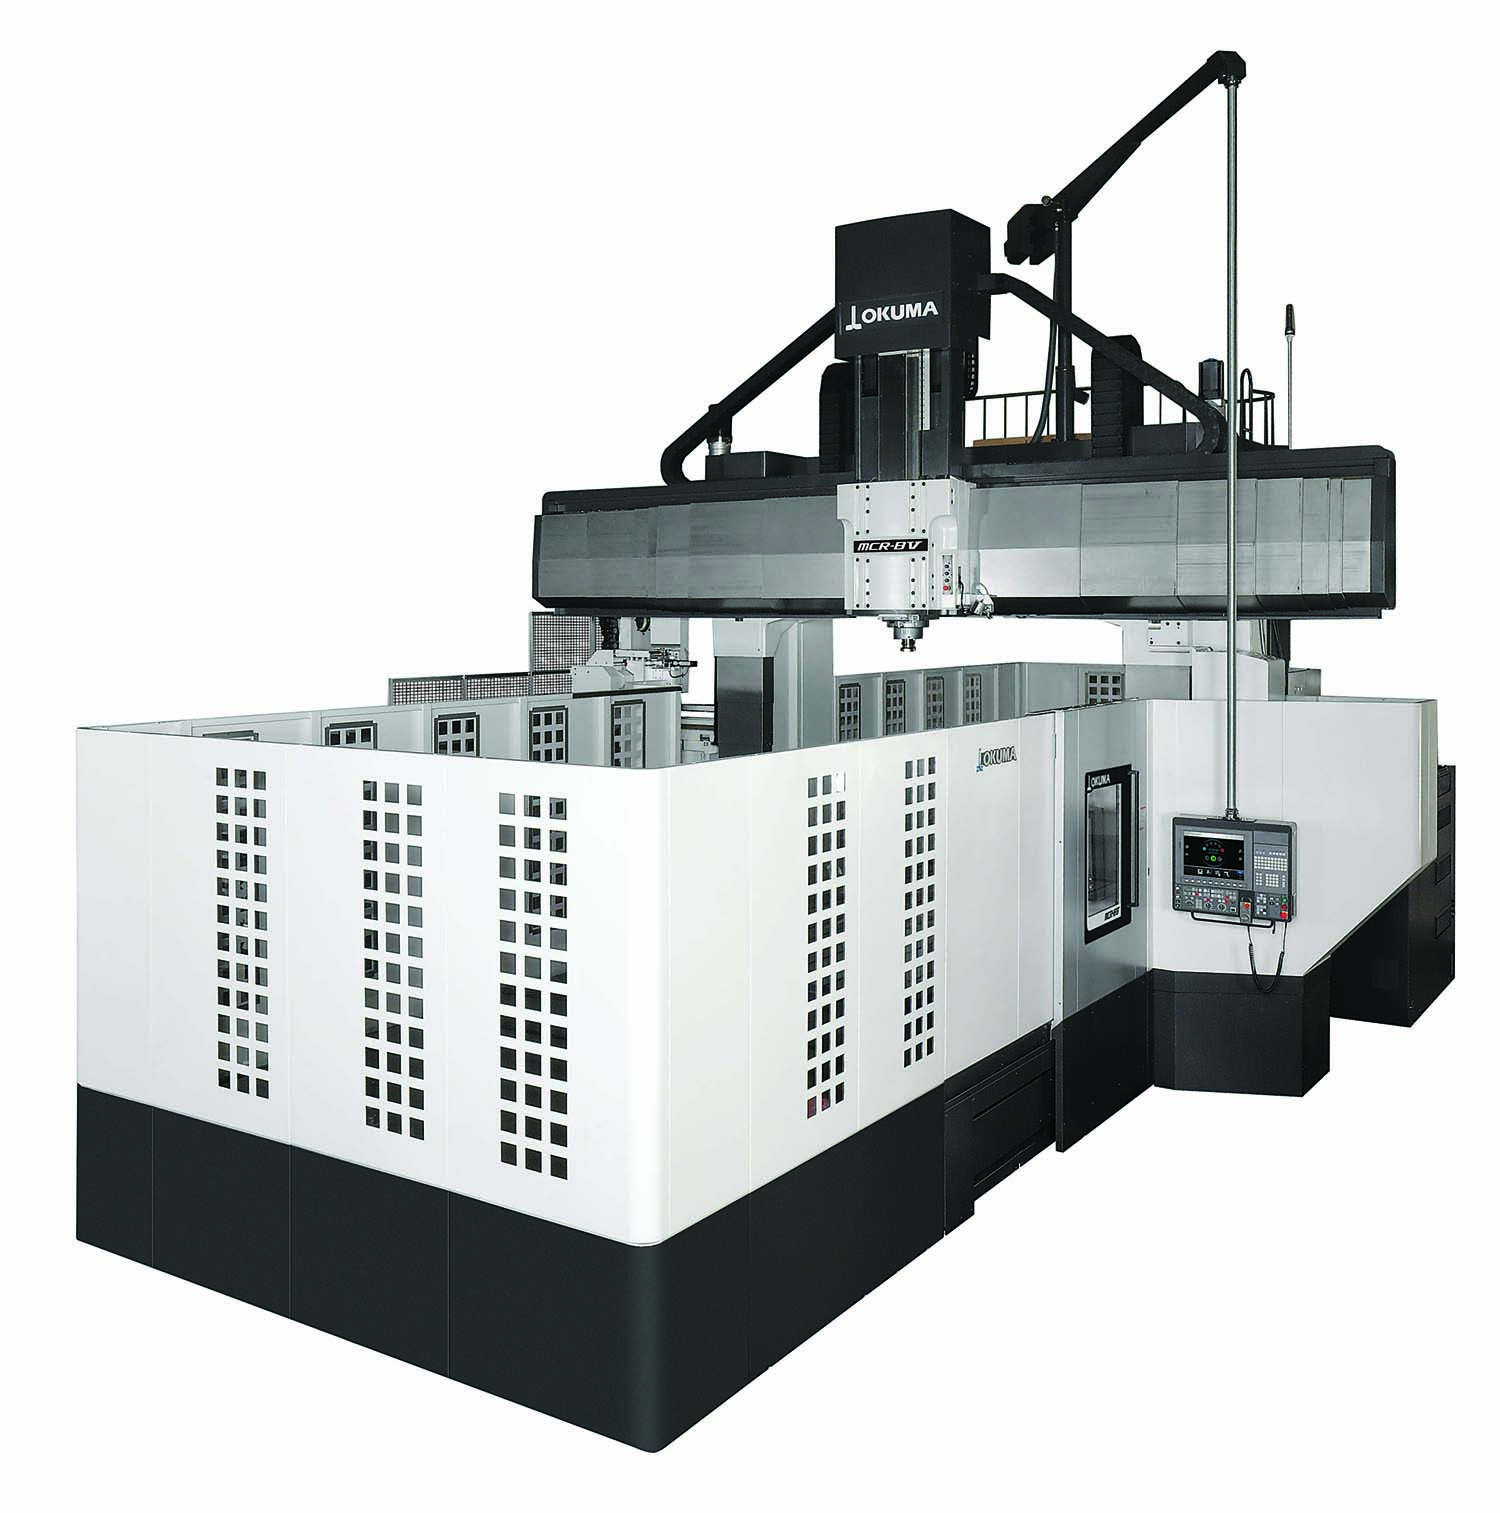 The MCR-BV double-column machining center is suitable for heavy-duty multiaxis milling of large components.